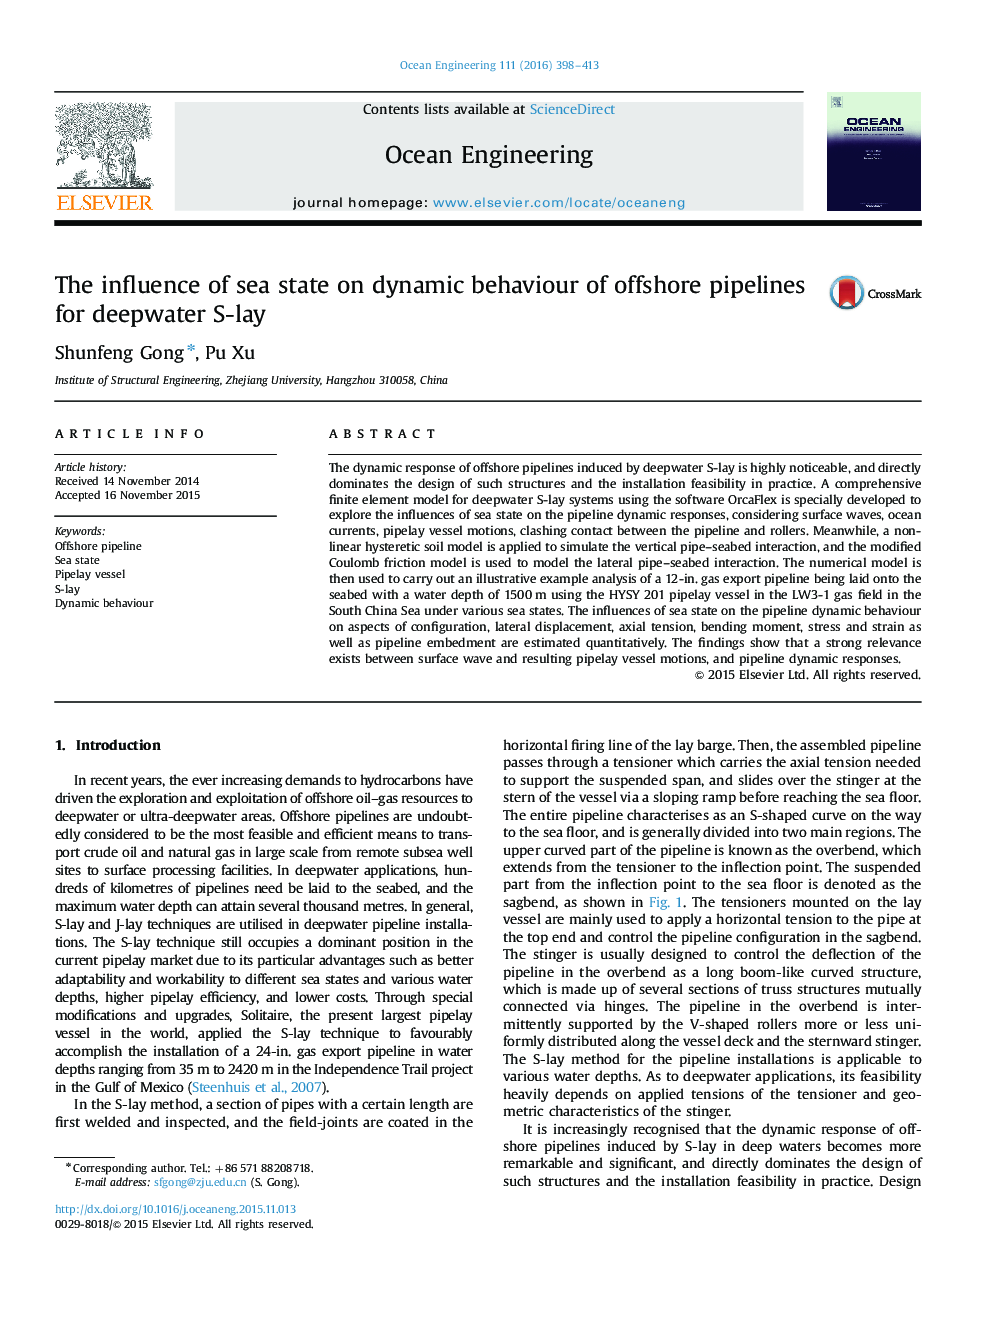 The influence of sea state on dynamic behaviour of offshore pipelines for deepwater S-lay